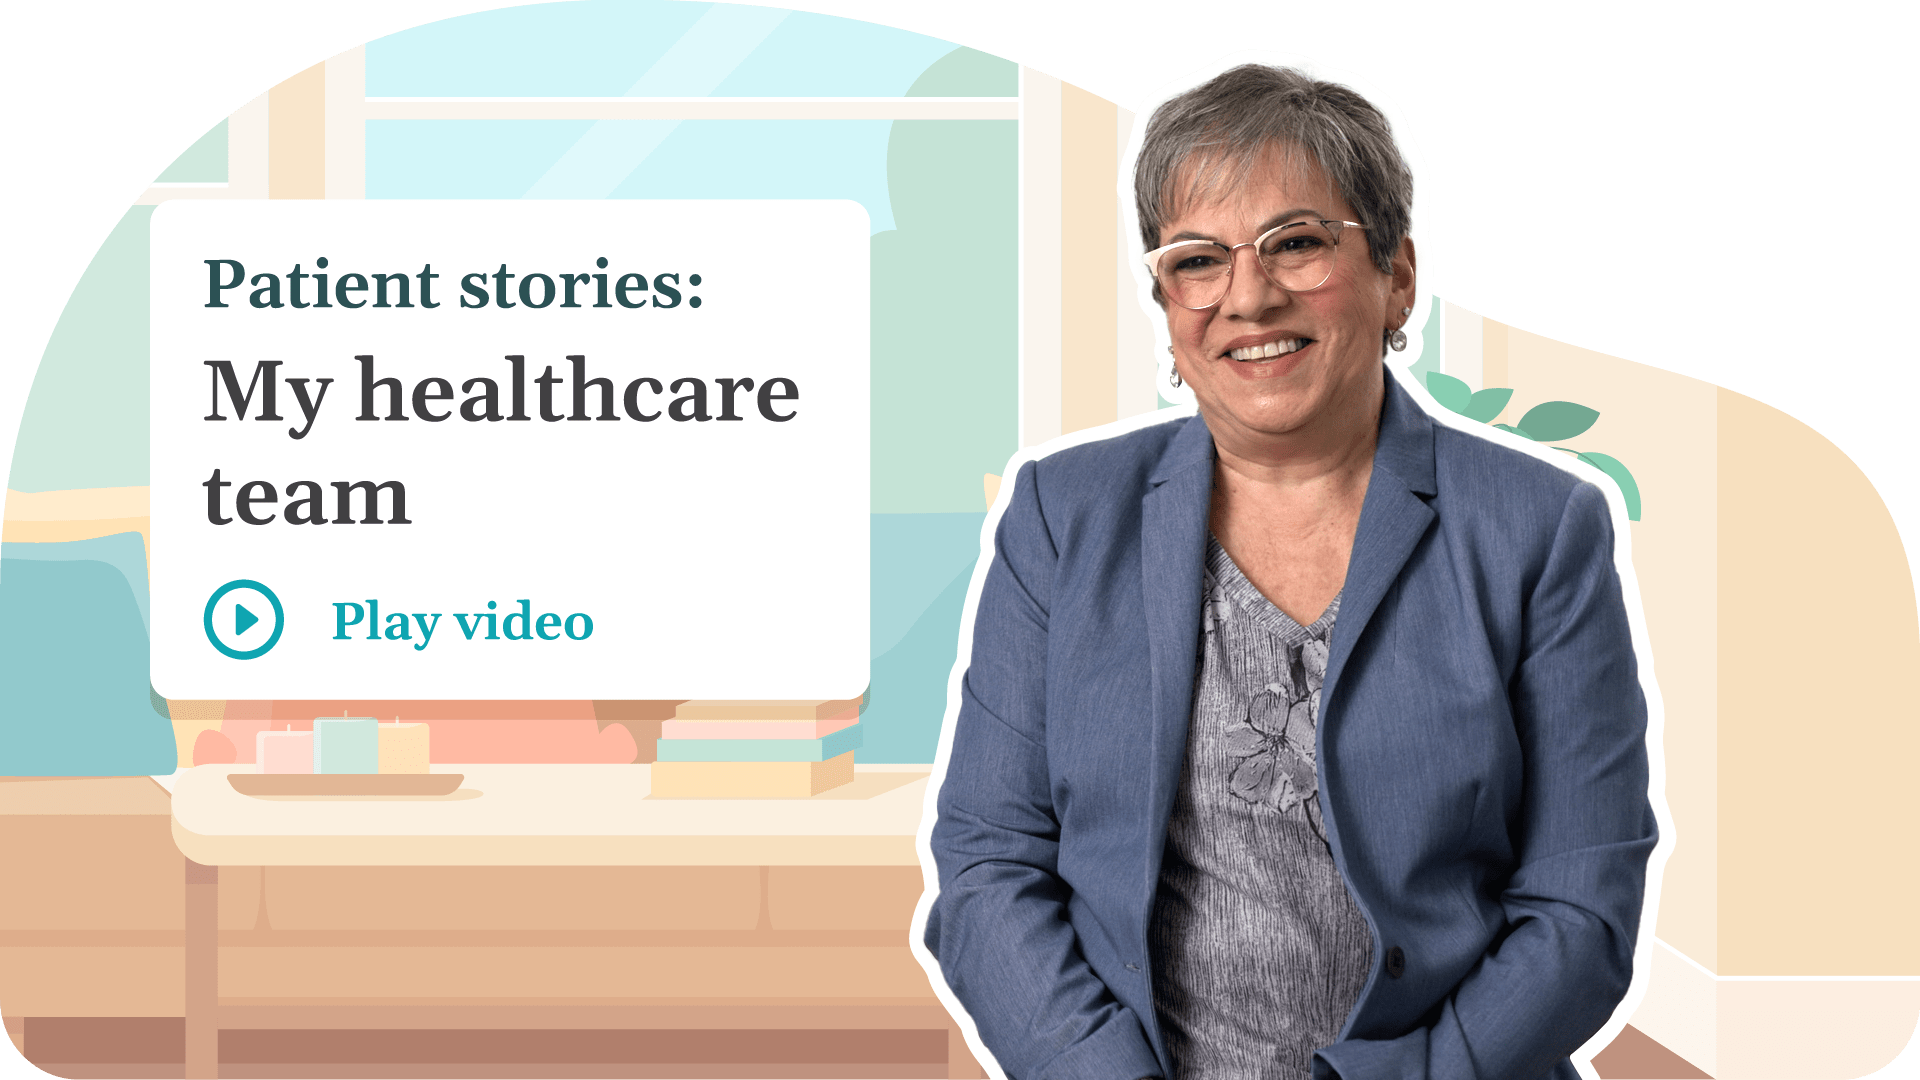 [Tap to play] Thumbnail for a video titled: Patient stories: My healthcare team.